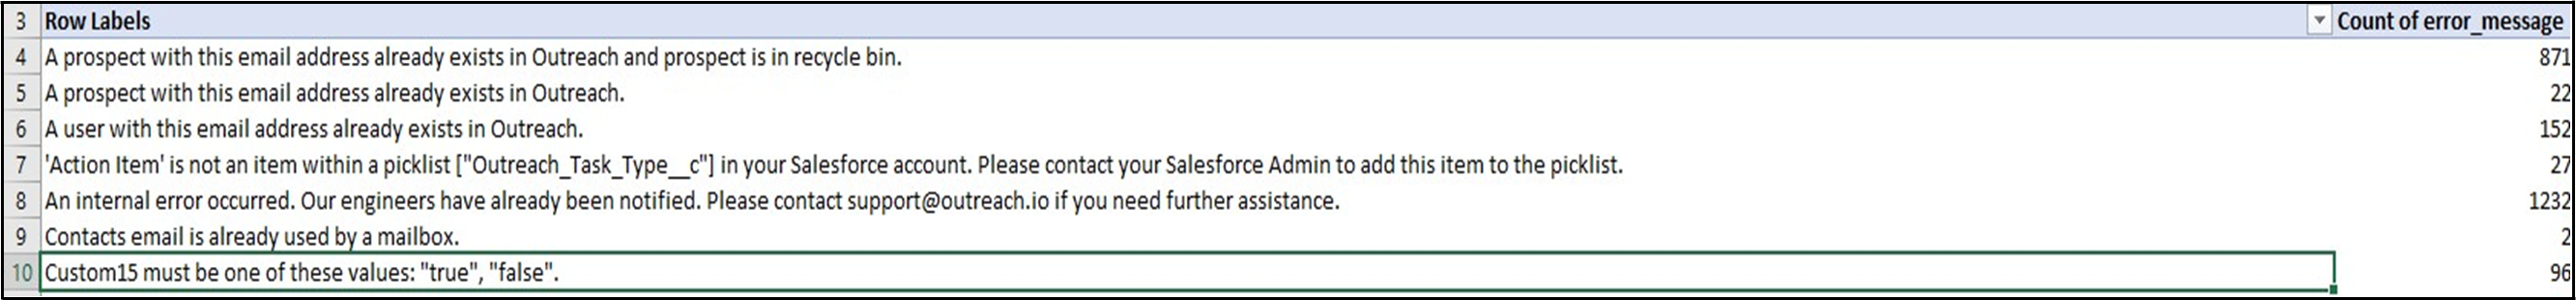 crm_sync_errors-outbound-error-prospect1.png